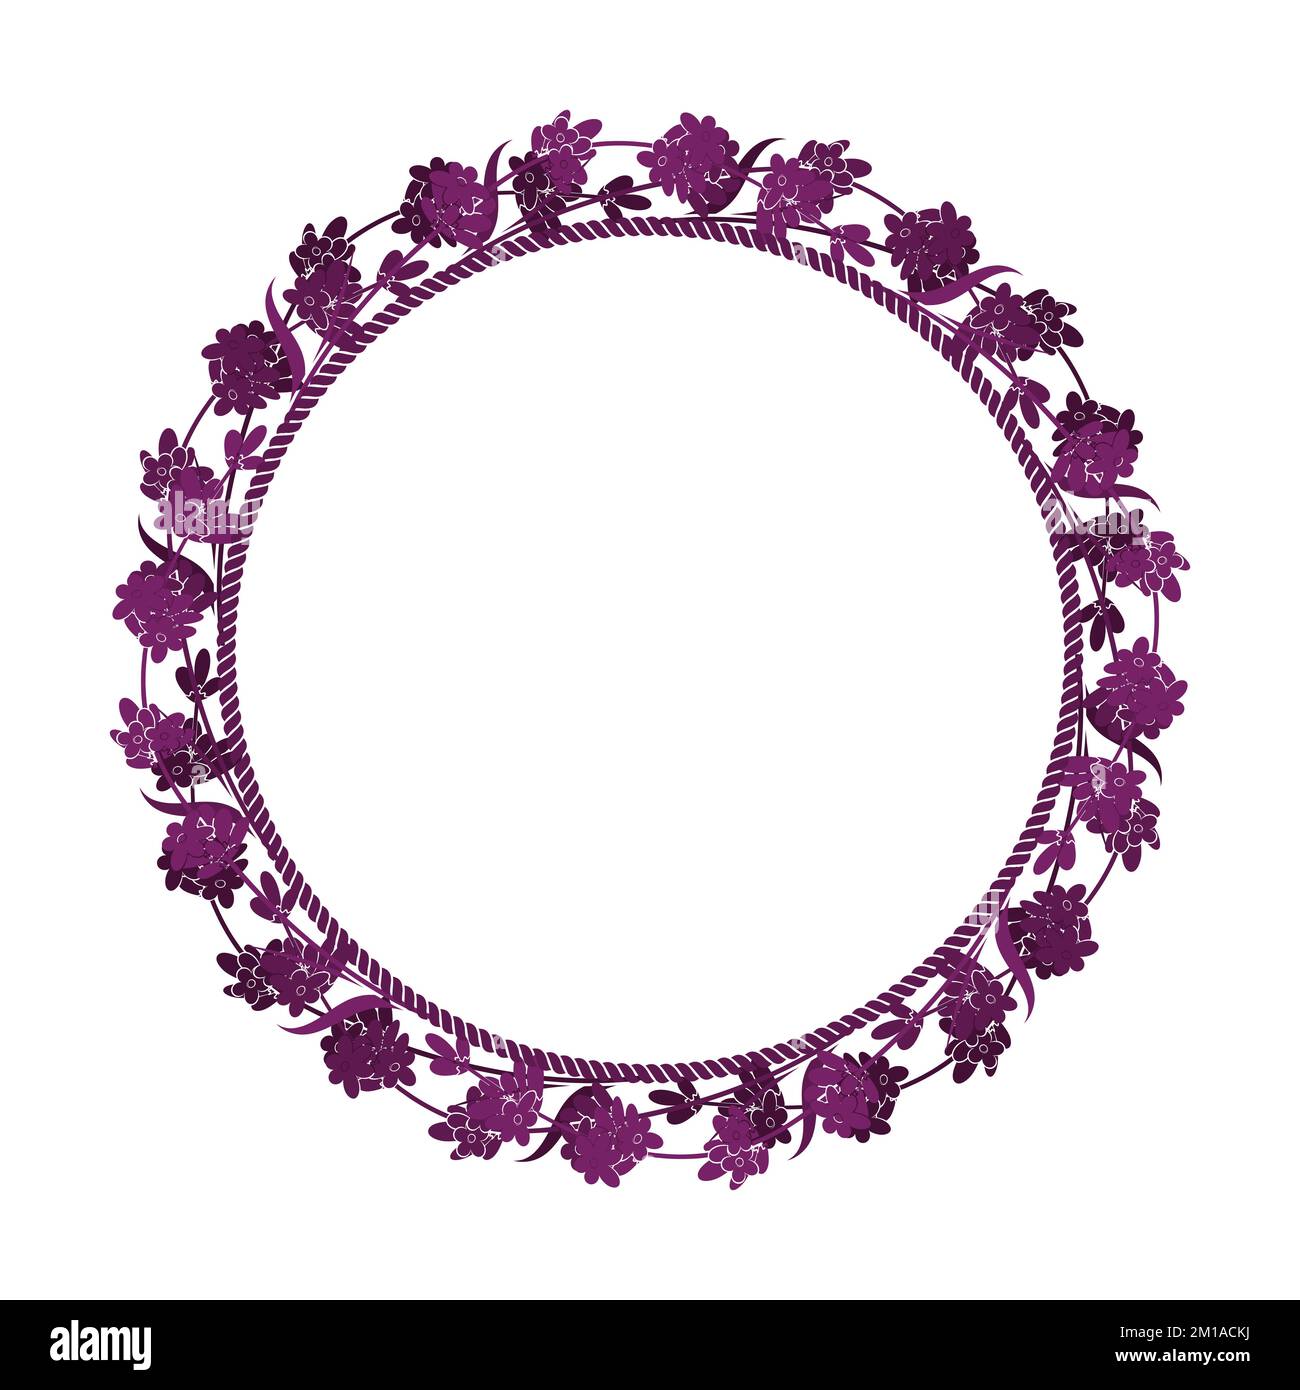 Round frame of rope with branch and flower of lavender. Vector illustration on a white background. Stock Vector